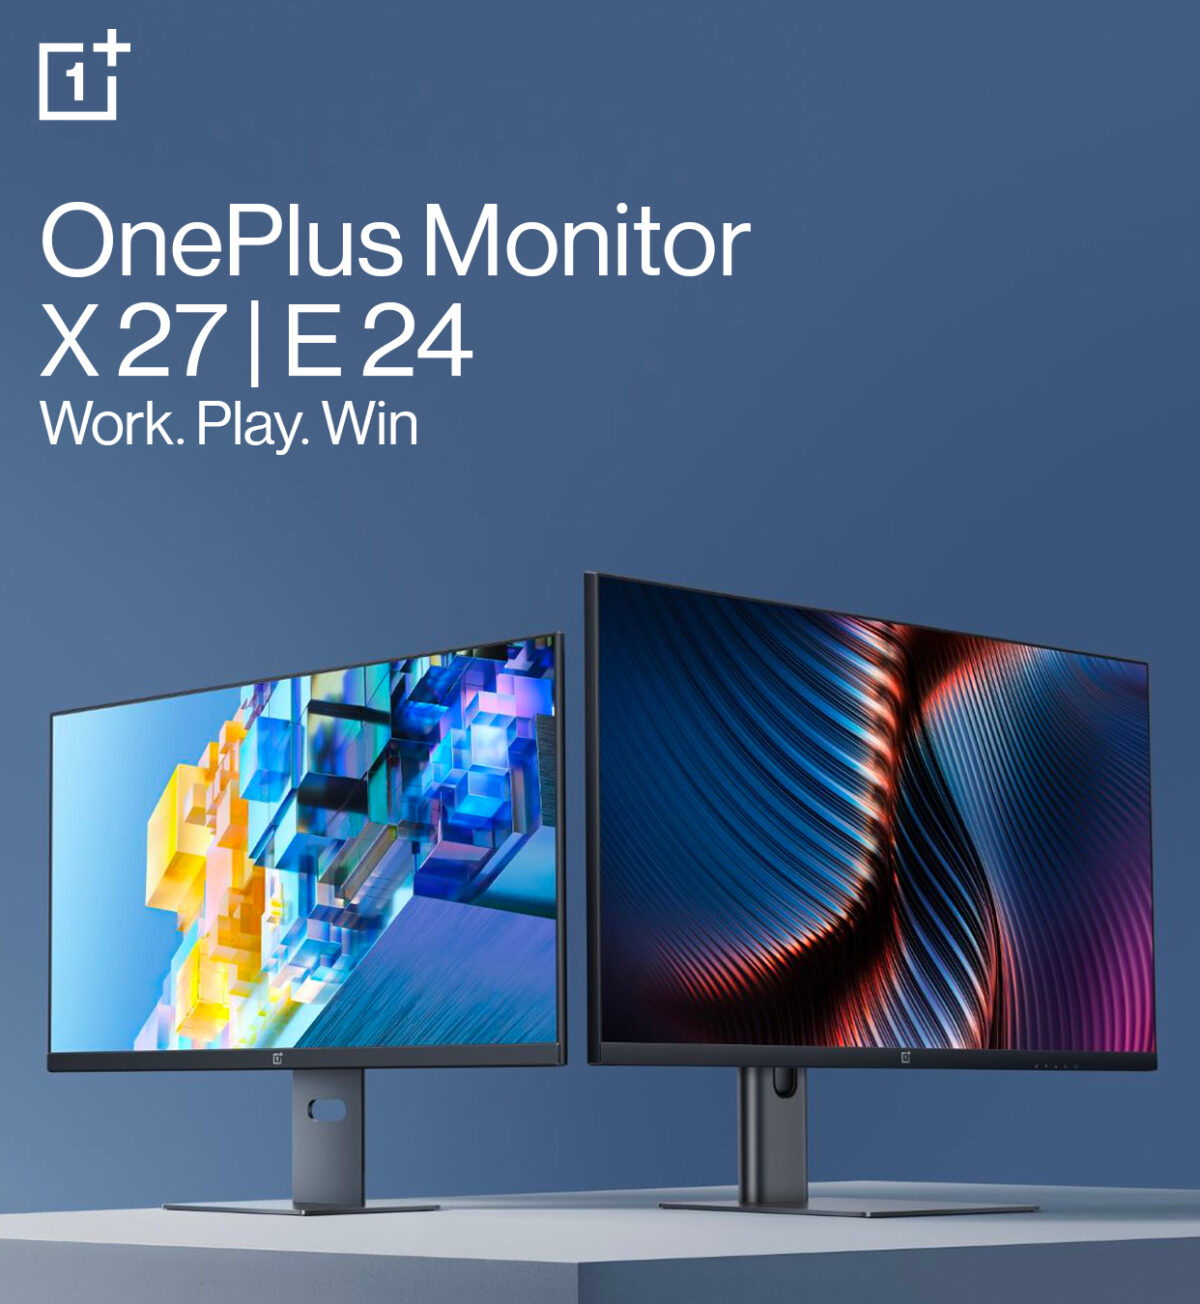 OnePlus Monitor X 27, E 24 Launched in India | Check out the Specs and Features